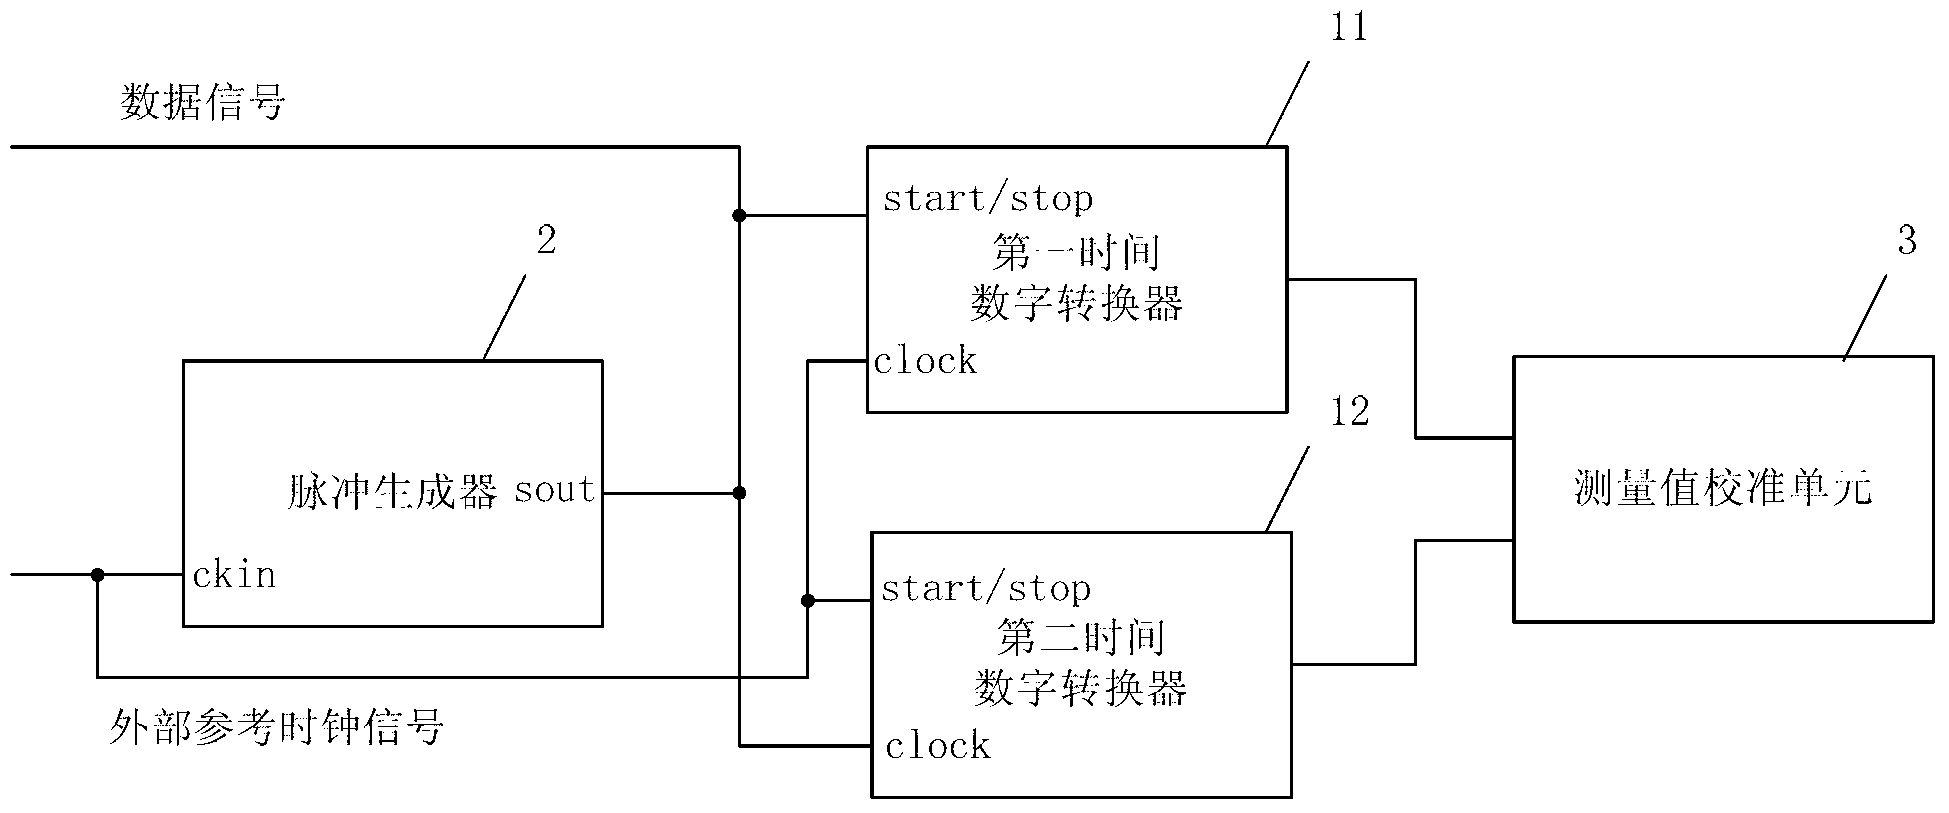 Circuit, method and system for time measurement